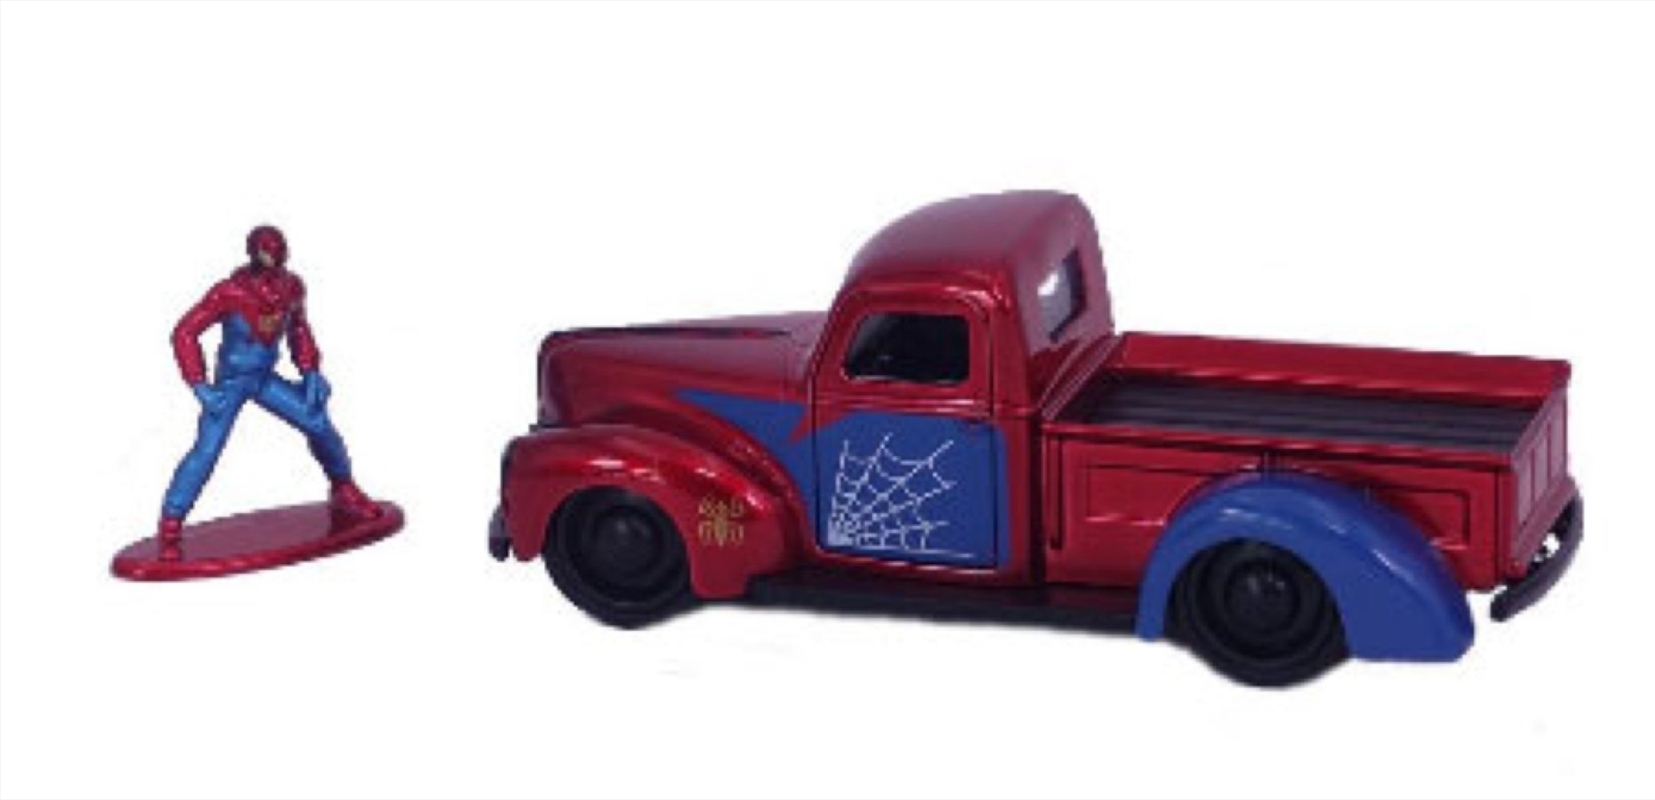 Spider-Man - 1941 Ford Pick Up with Spider-Man 1:32 Scale Hollywood Ride | Merchandise